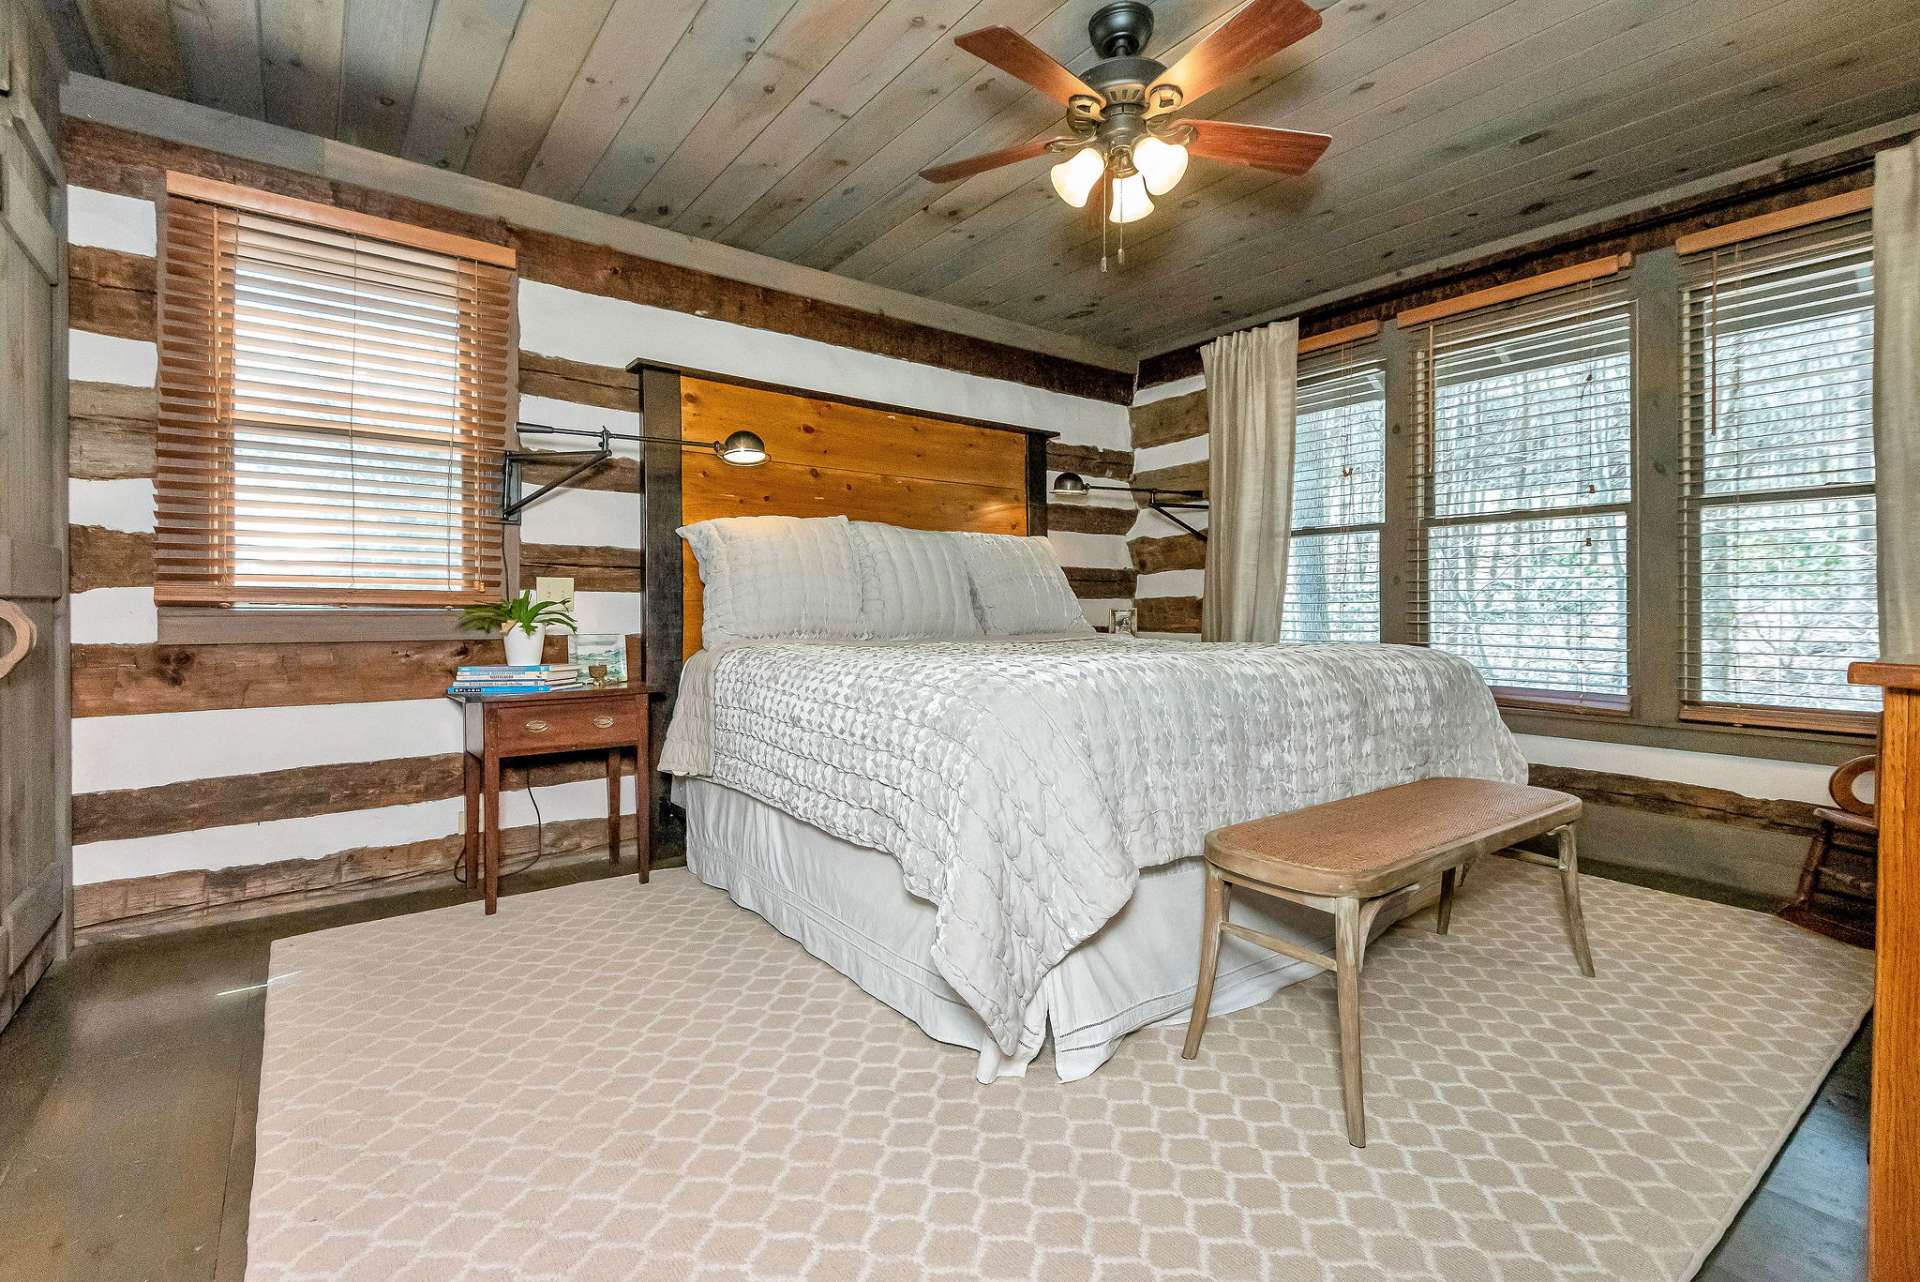 Located on the main level of the cabin, the primary bedroom provides easy access and convenience for the occupants, offering a sense of privacy and tranquility away from the main living areas.